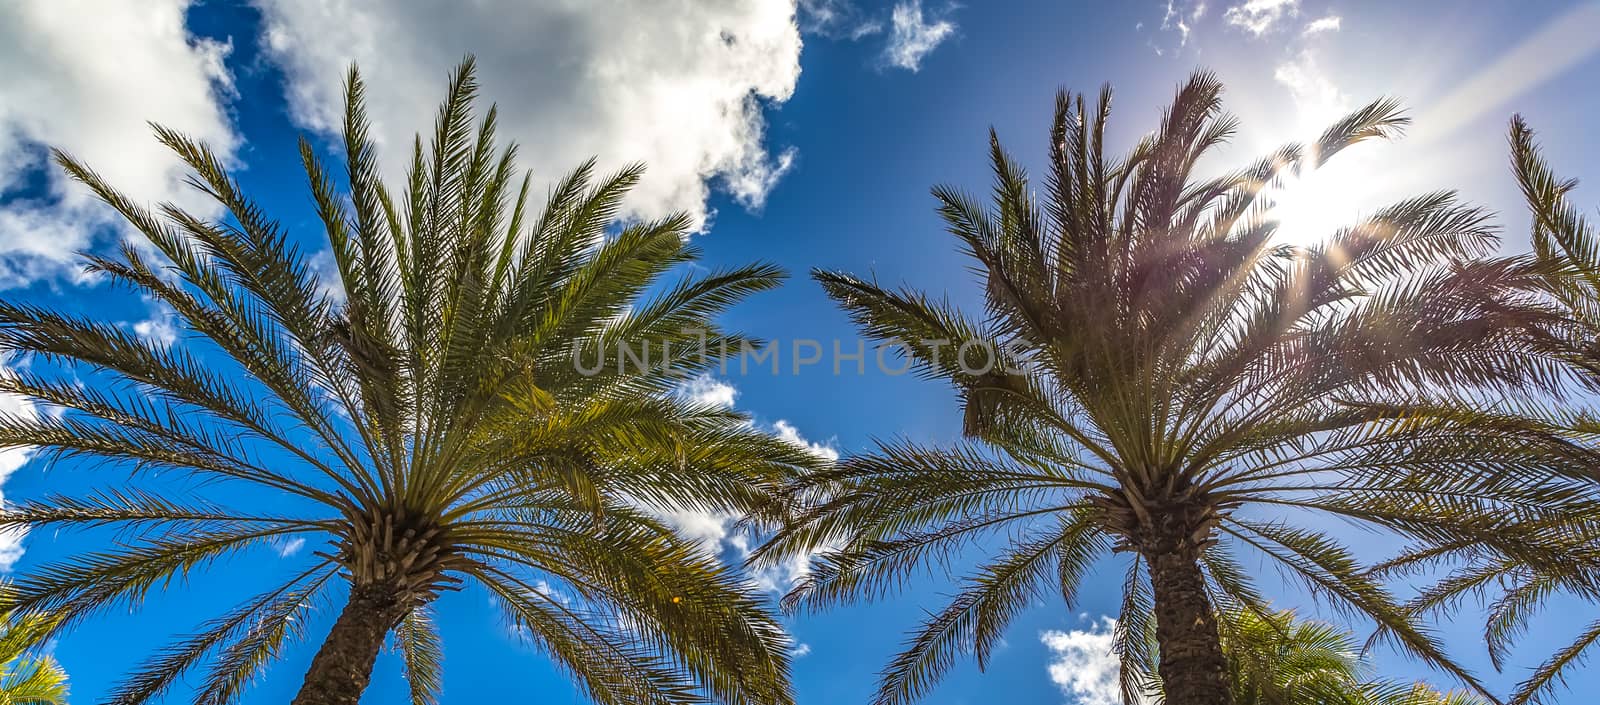 View of two palm trees from the ground up with the Sun shining through the leaves and gorgeous blue sky as a background. Caribbean Island of Curacao